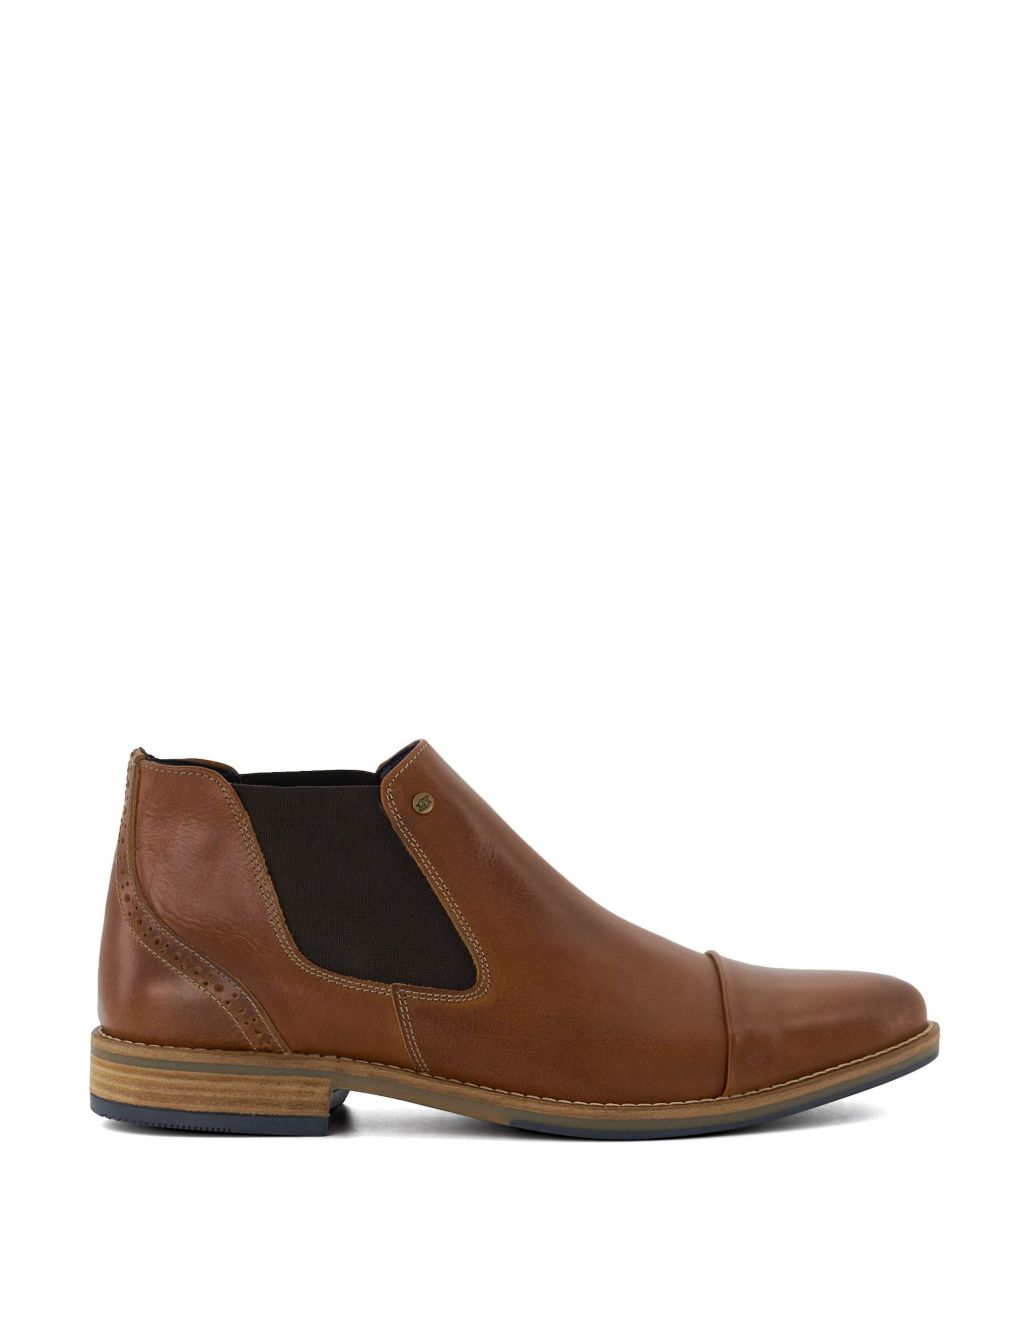 Leather Pull-On Chelsea Boots image 1